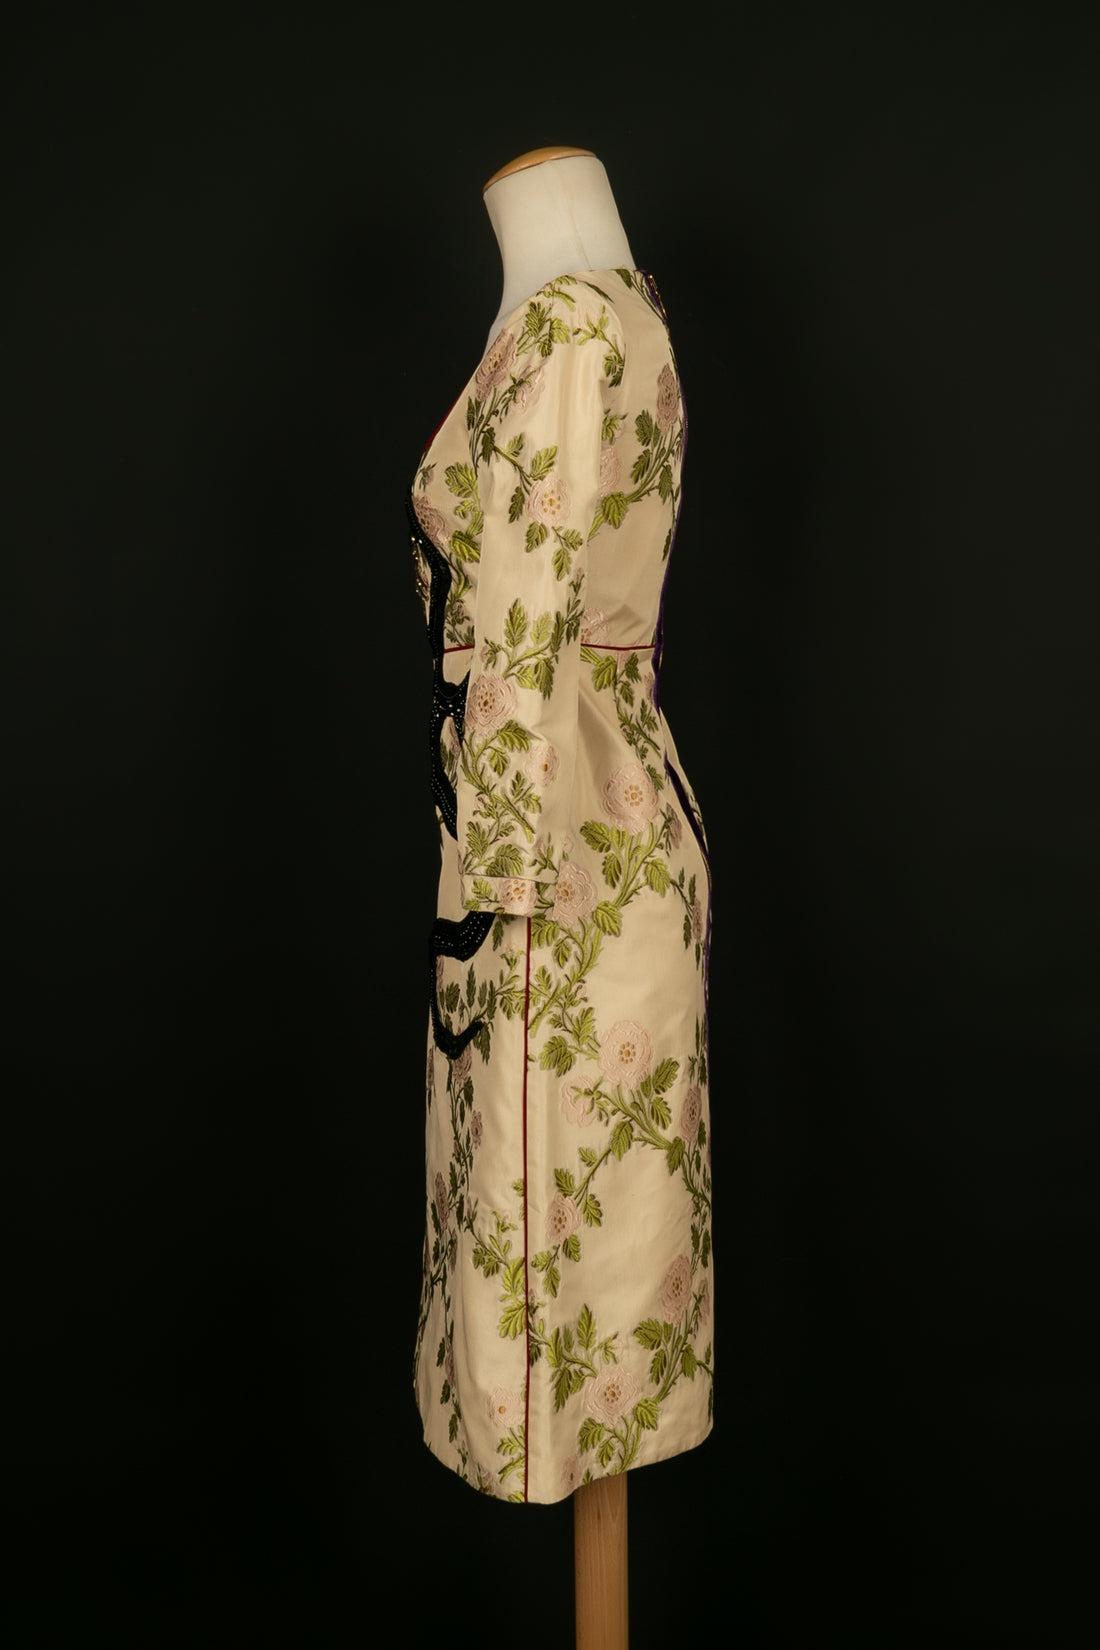 Gucci Mid-Length Dress Pre-Fall with Floral Patterns, 2016 In Excellent Condition For Sale In SAINT-OUEN-SUR-SEINE, FR